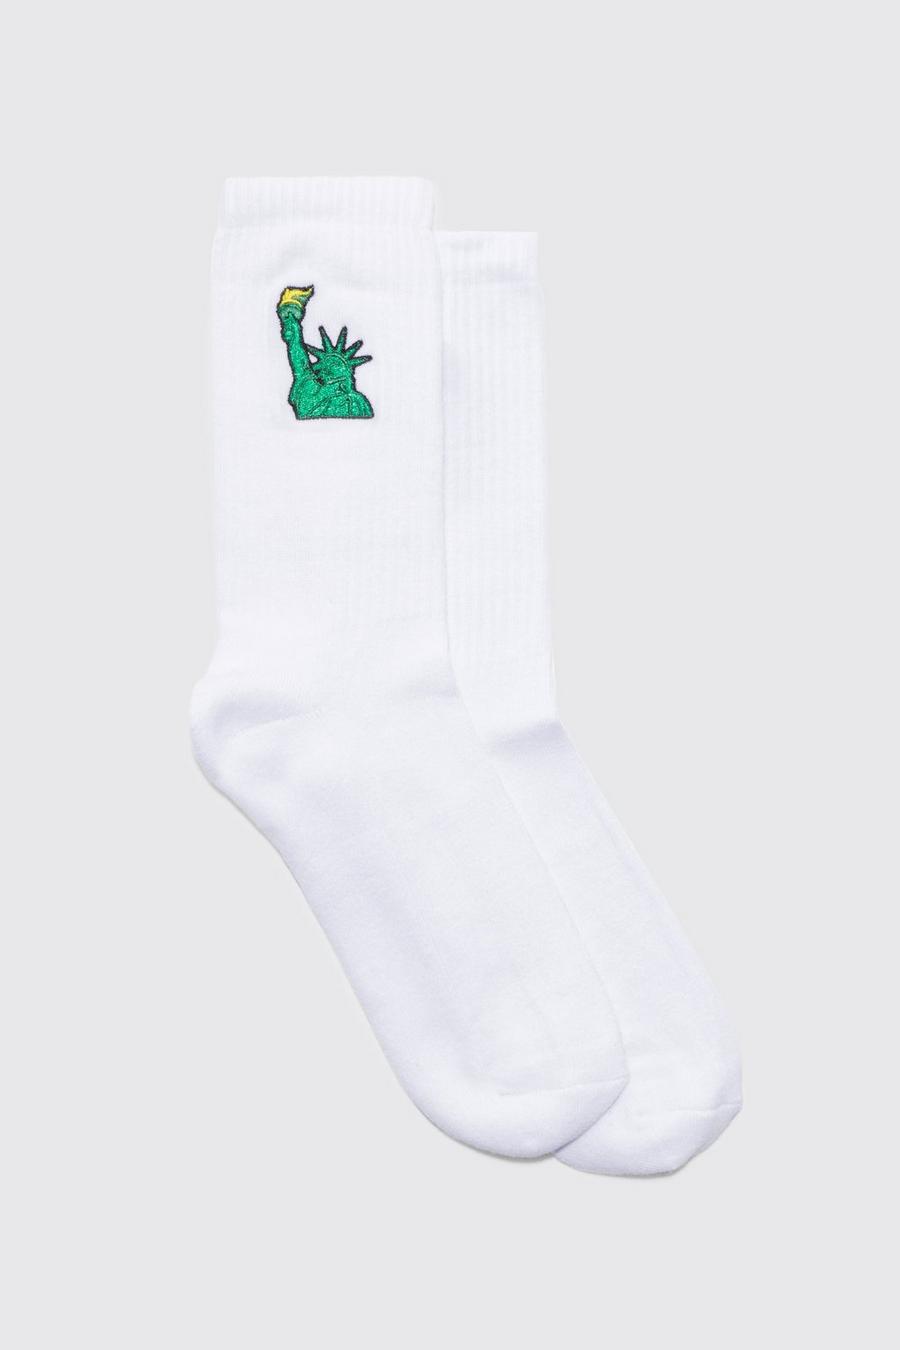 Statue Of Liberty Embroidered Sports Socks, White